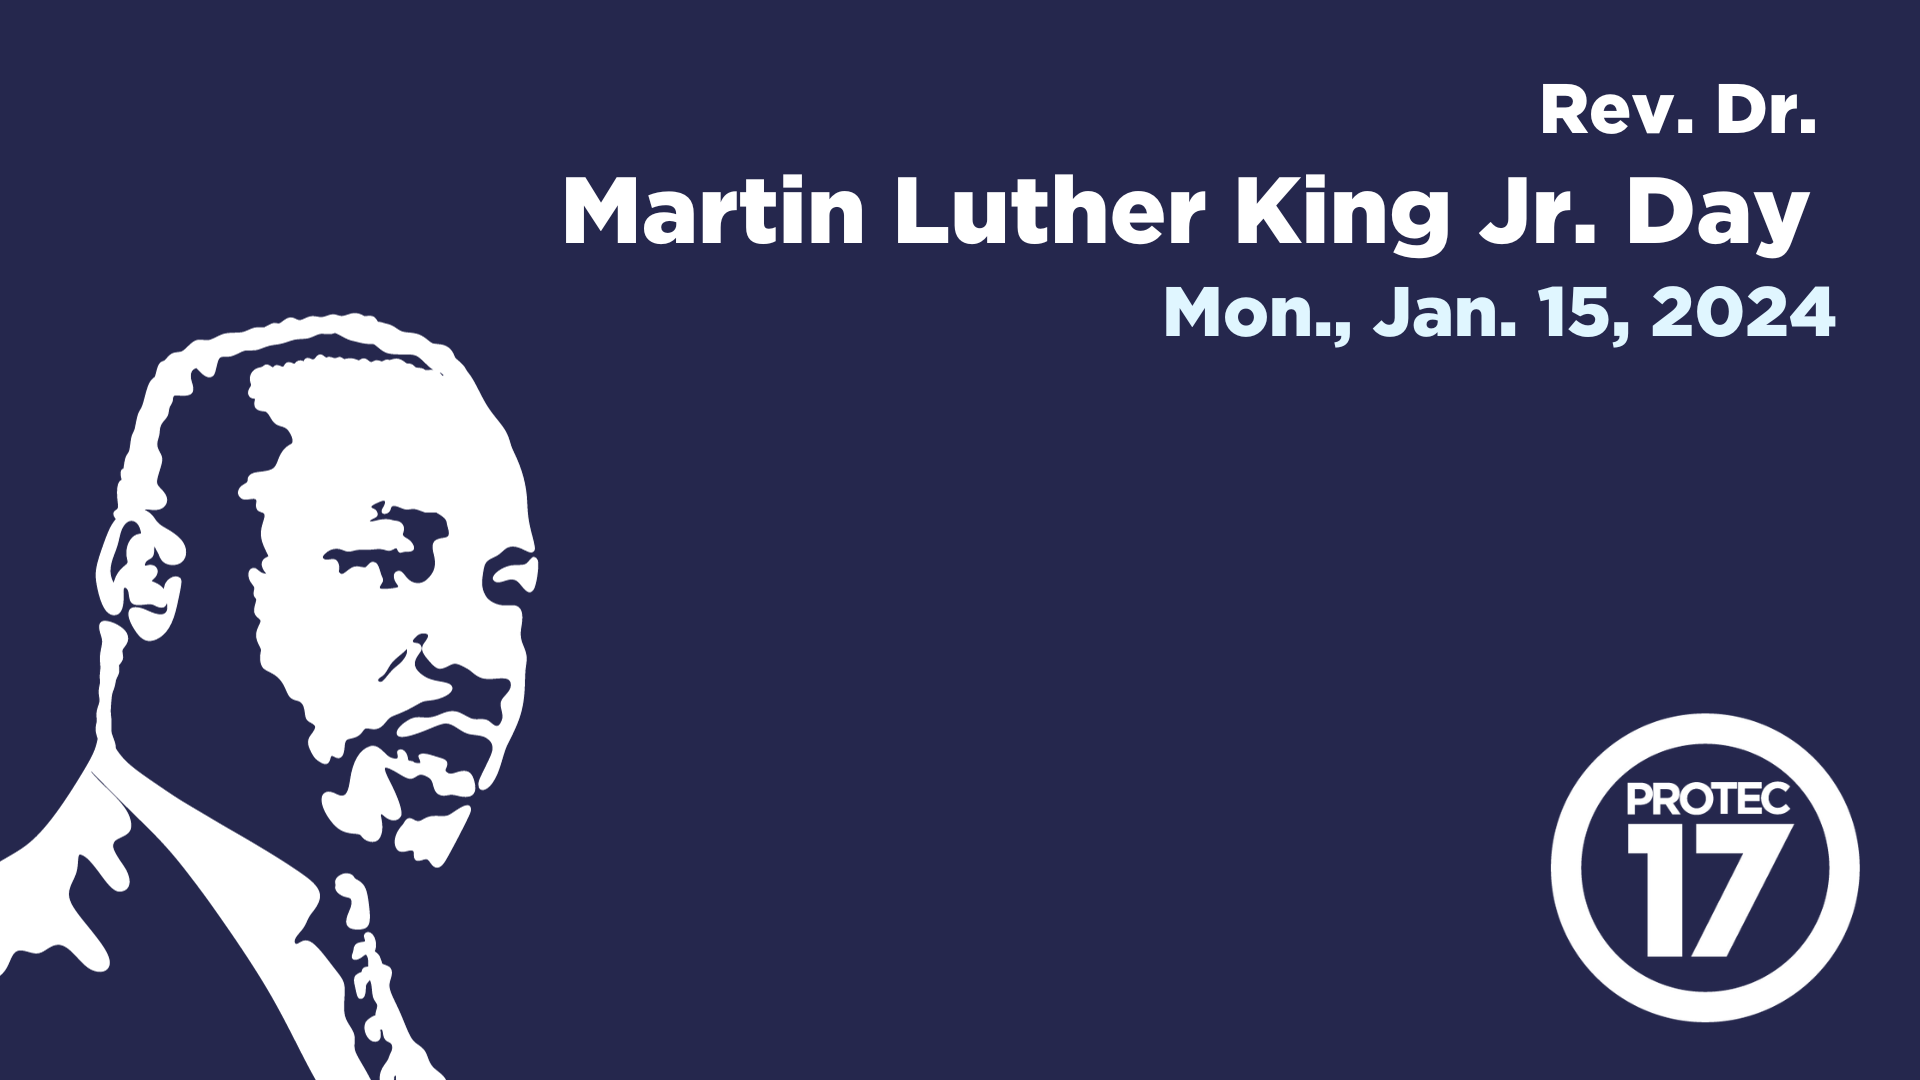 Dark blue background with white text in the upper right corner that reads, "Rev. Dr. Martin Luther King Jr. Day," followed by light blue text that reads, "Mon., Jan. 15, 2024" There is a white, artistically drawn silhouette of MLK Jr. in the bottom left and the PROTEC17 logo in the bottom right.